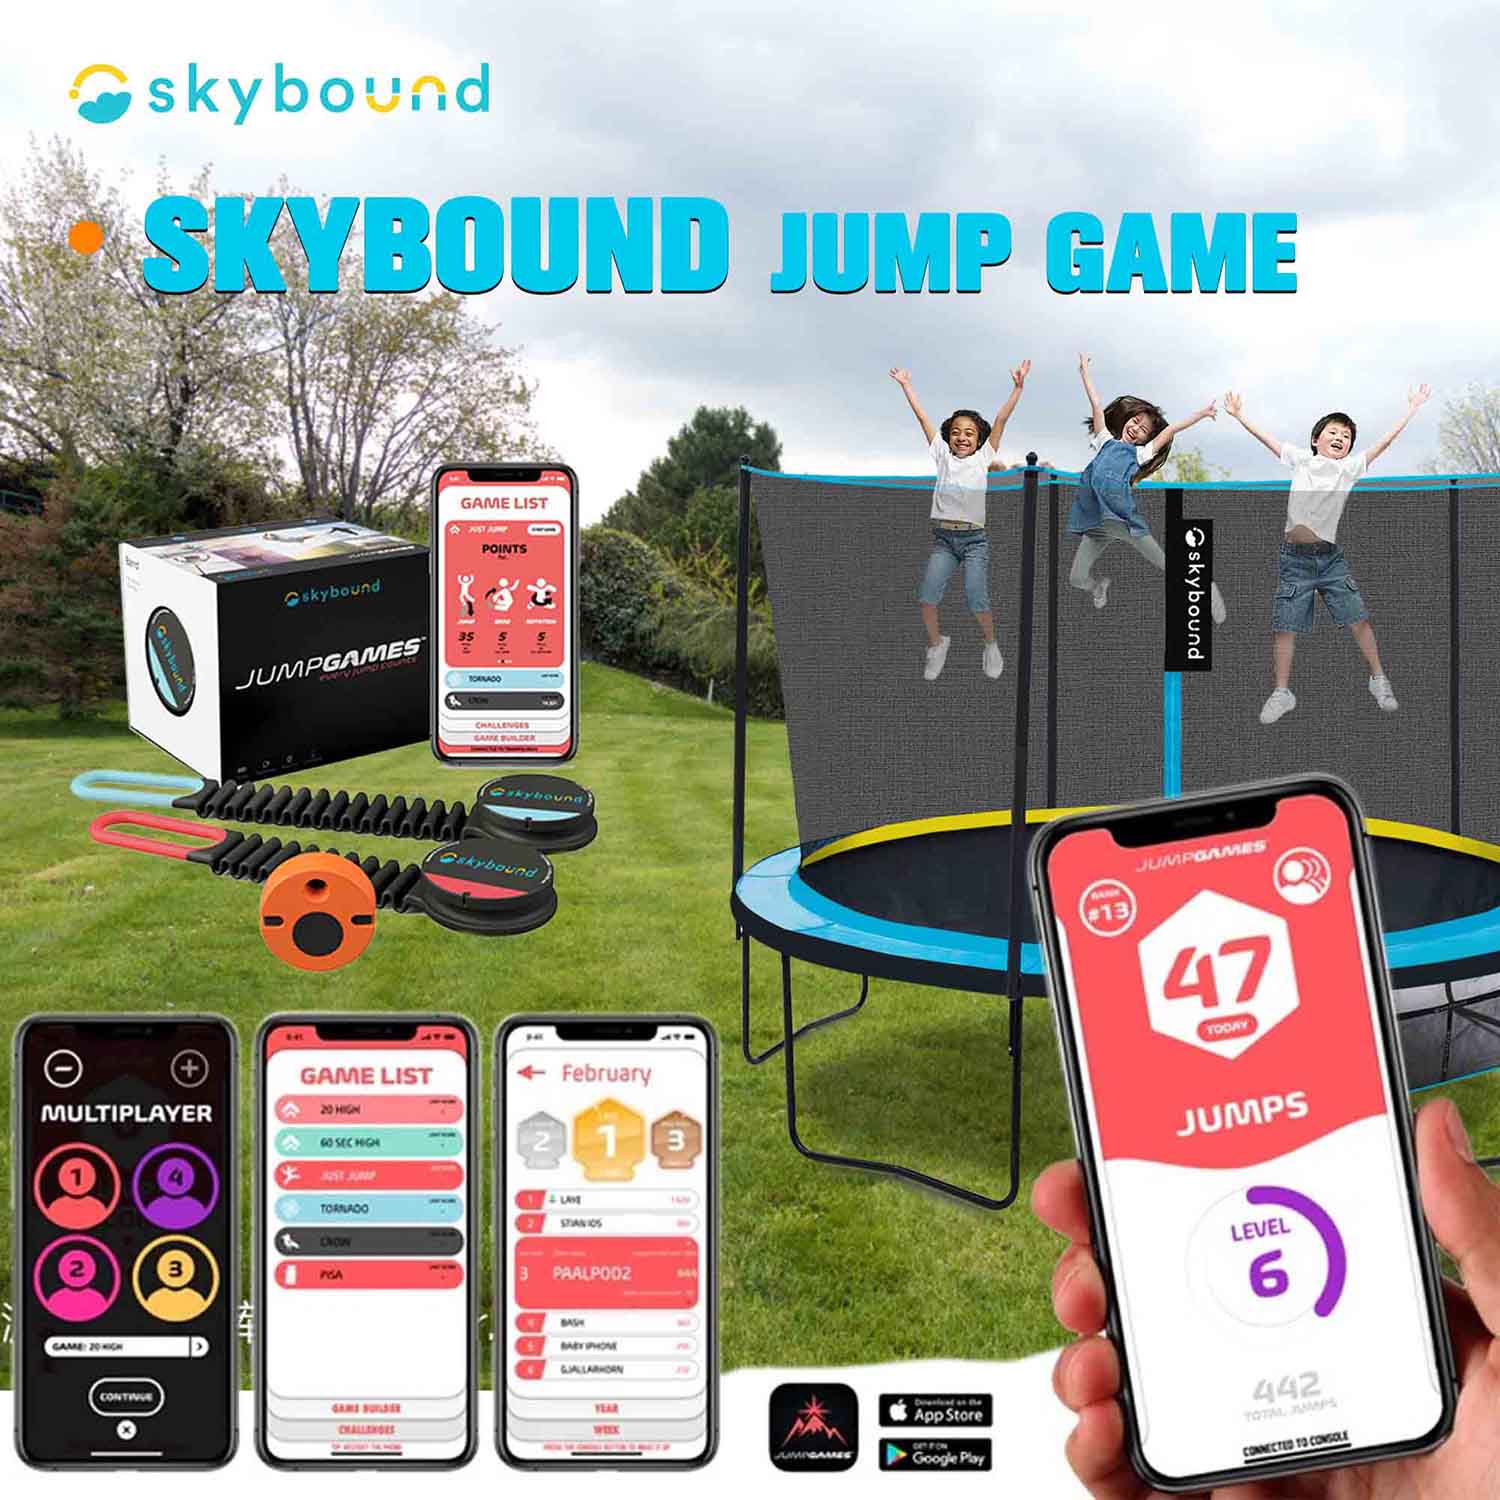 Title: SKYBOUND JUMP GAMES, On the left, there is an electronic wristband provided with the SkyRise trampoline. On the right, three children are jumping on a SkyRiae 14-foot trampoline. Below, there are four smartphone screens displaying the interface of the Jump Games app, along with icons supporting downloads for Android and Apple phones.